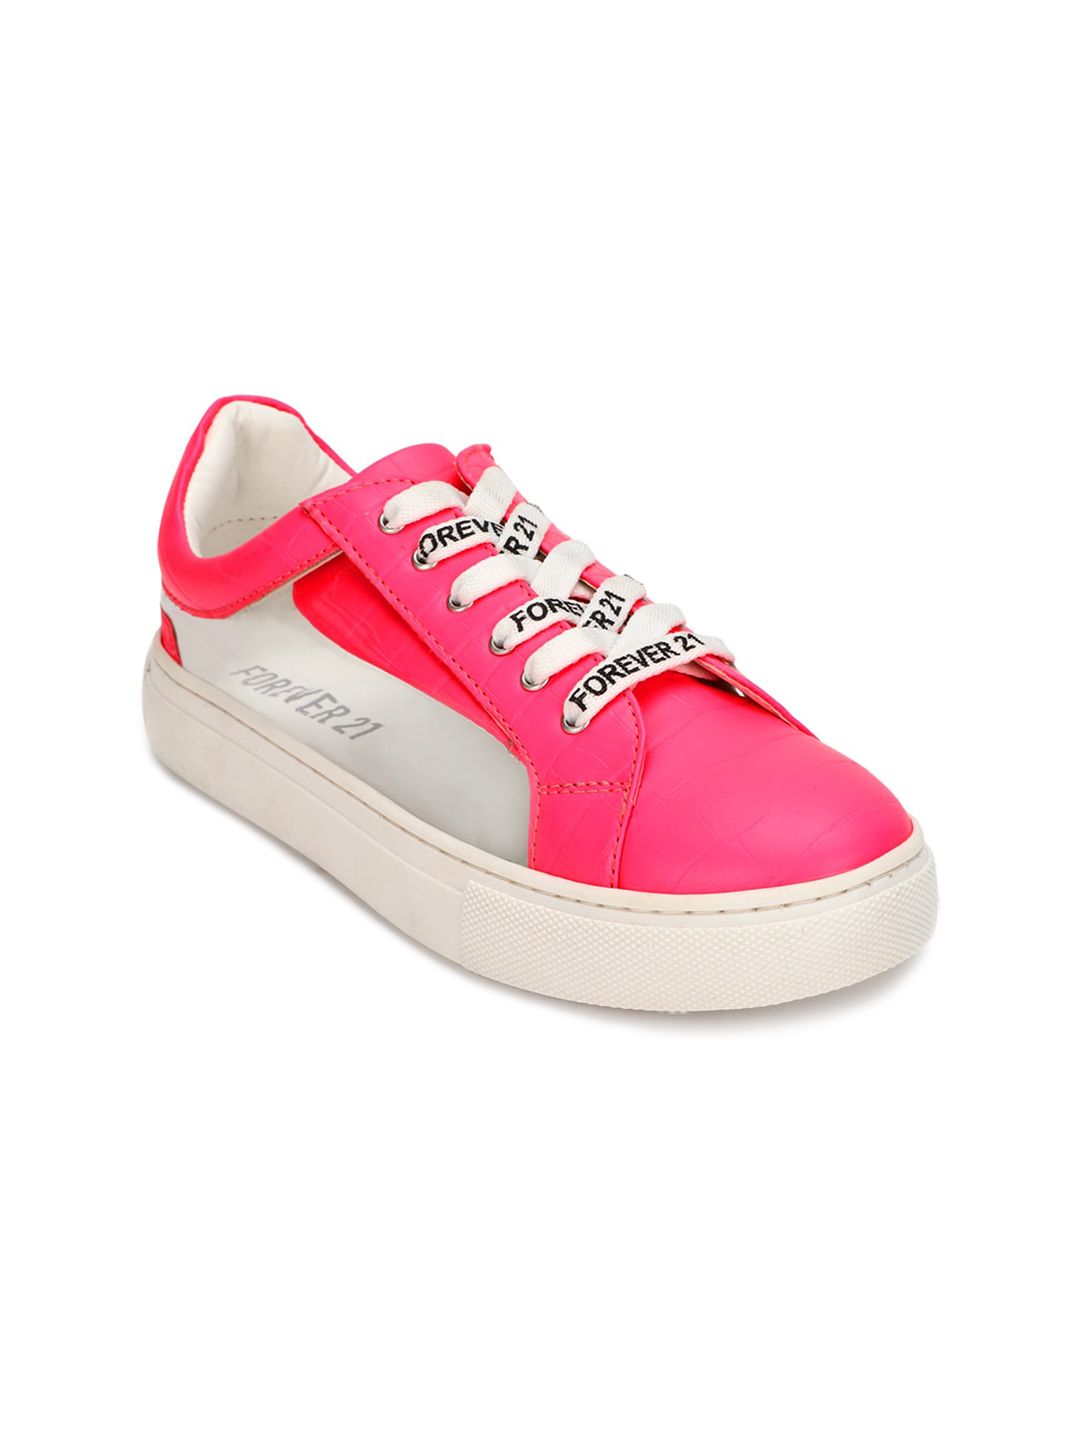 FOREVER 21 Women Pink Printed PU Sneakers Price in India